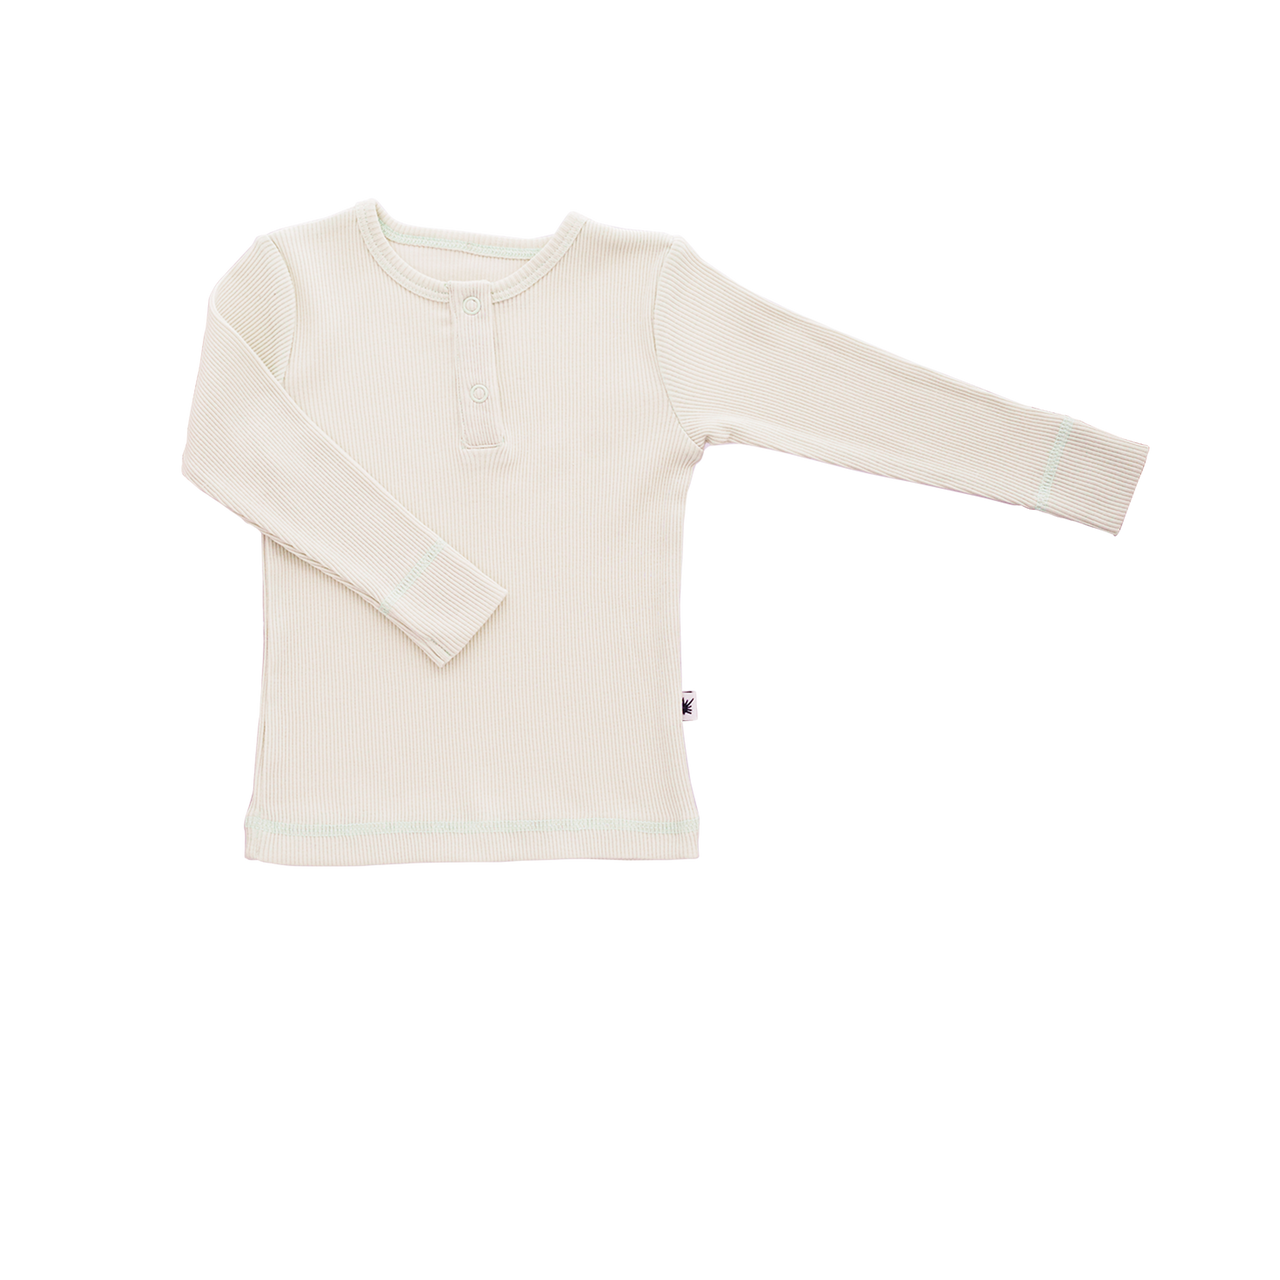 "Simples" Top - Offwhite